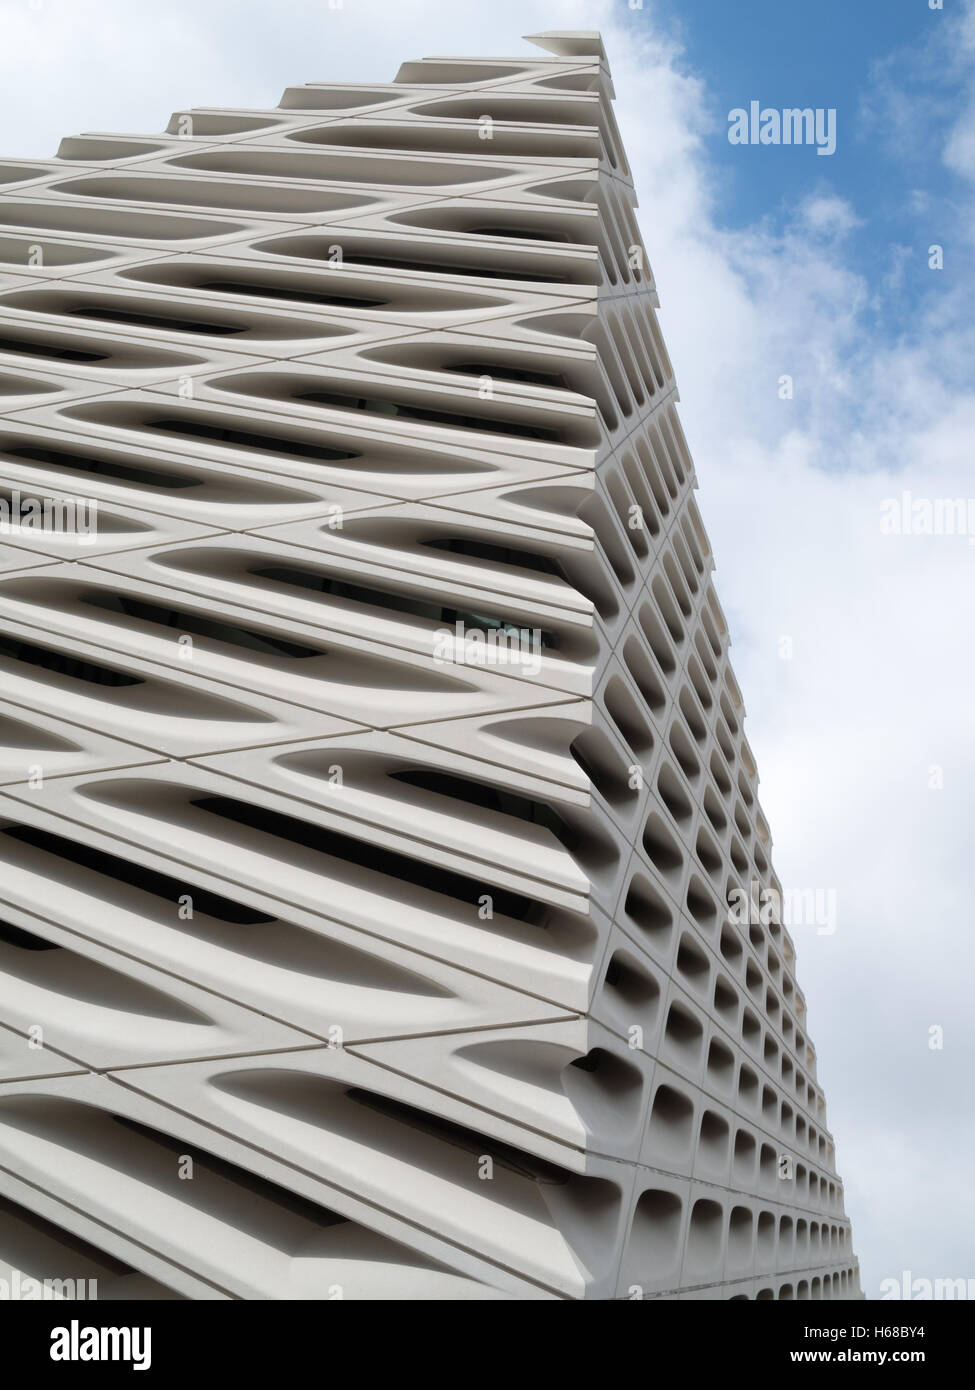 Detail of The Broad museum building facade Stock Photo